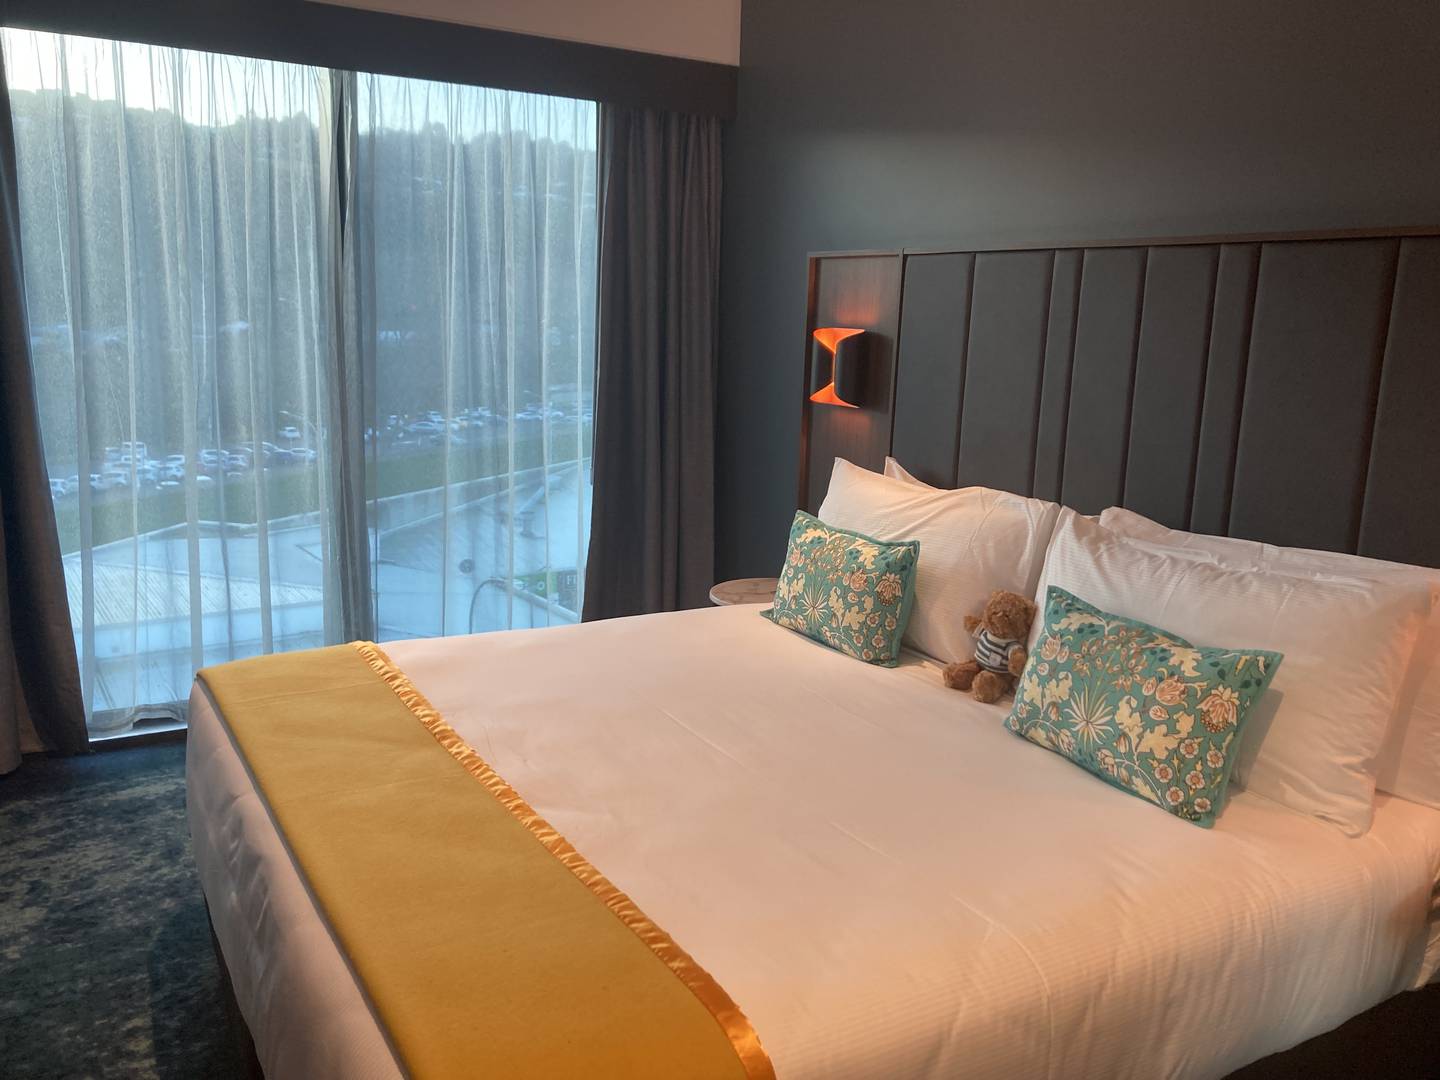 A view of the bedroom in the river view suite at the Sebel Wellington Lower Hutt. Photo / Melissa Nightingale